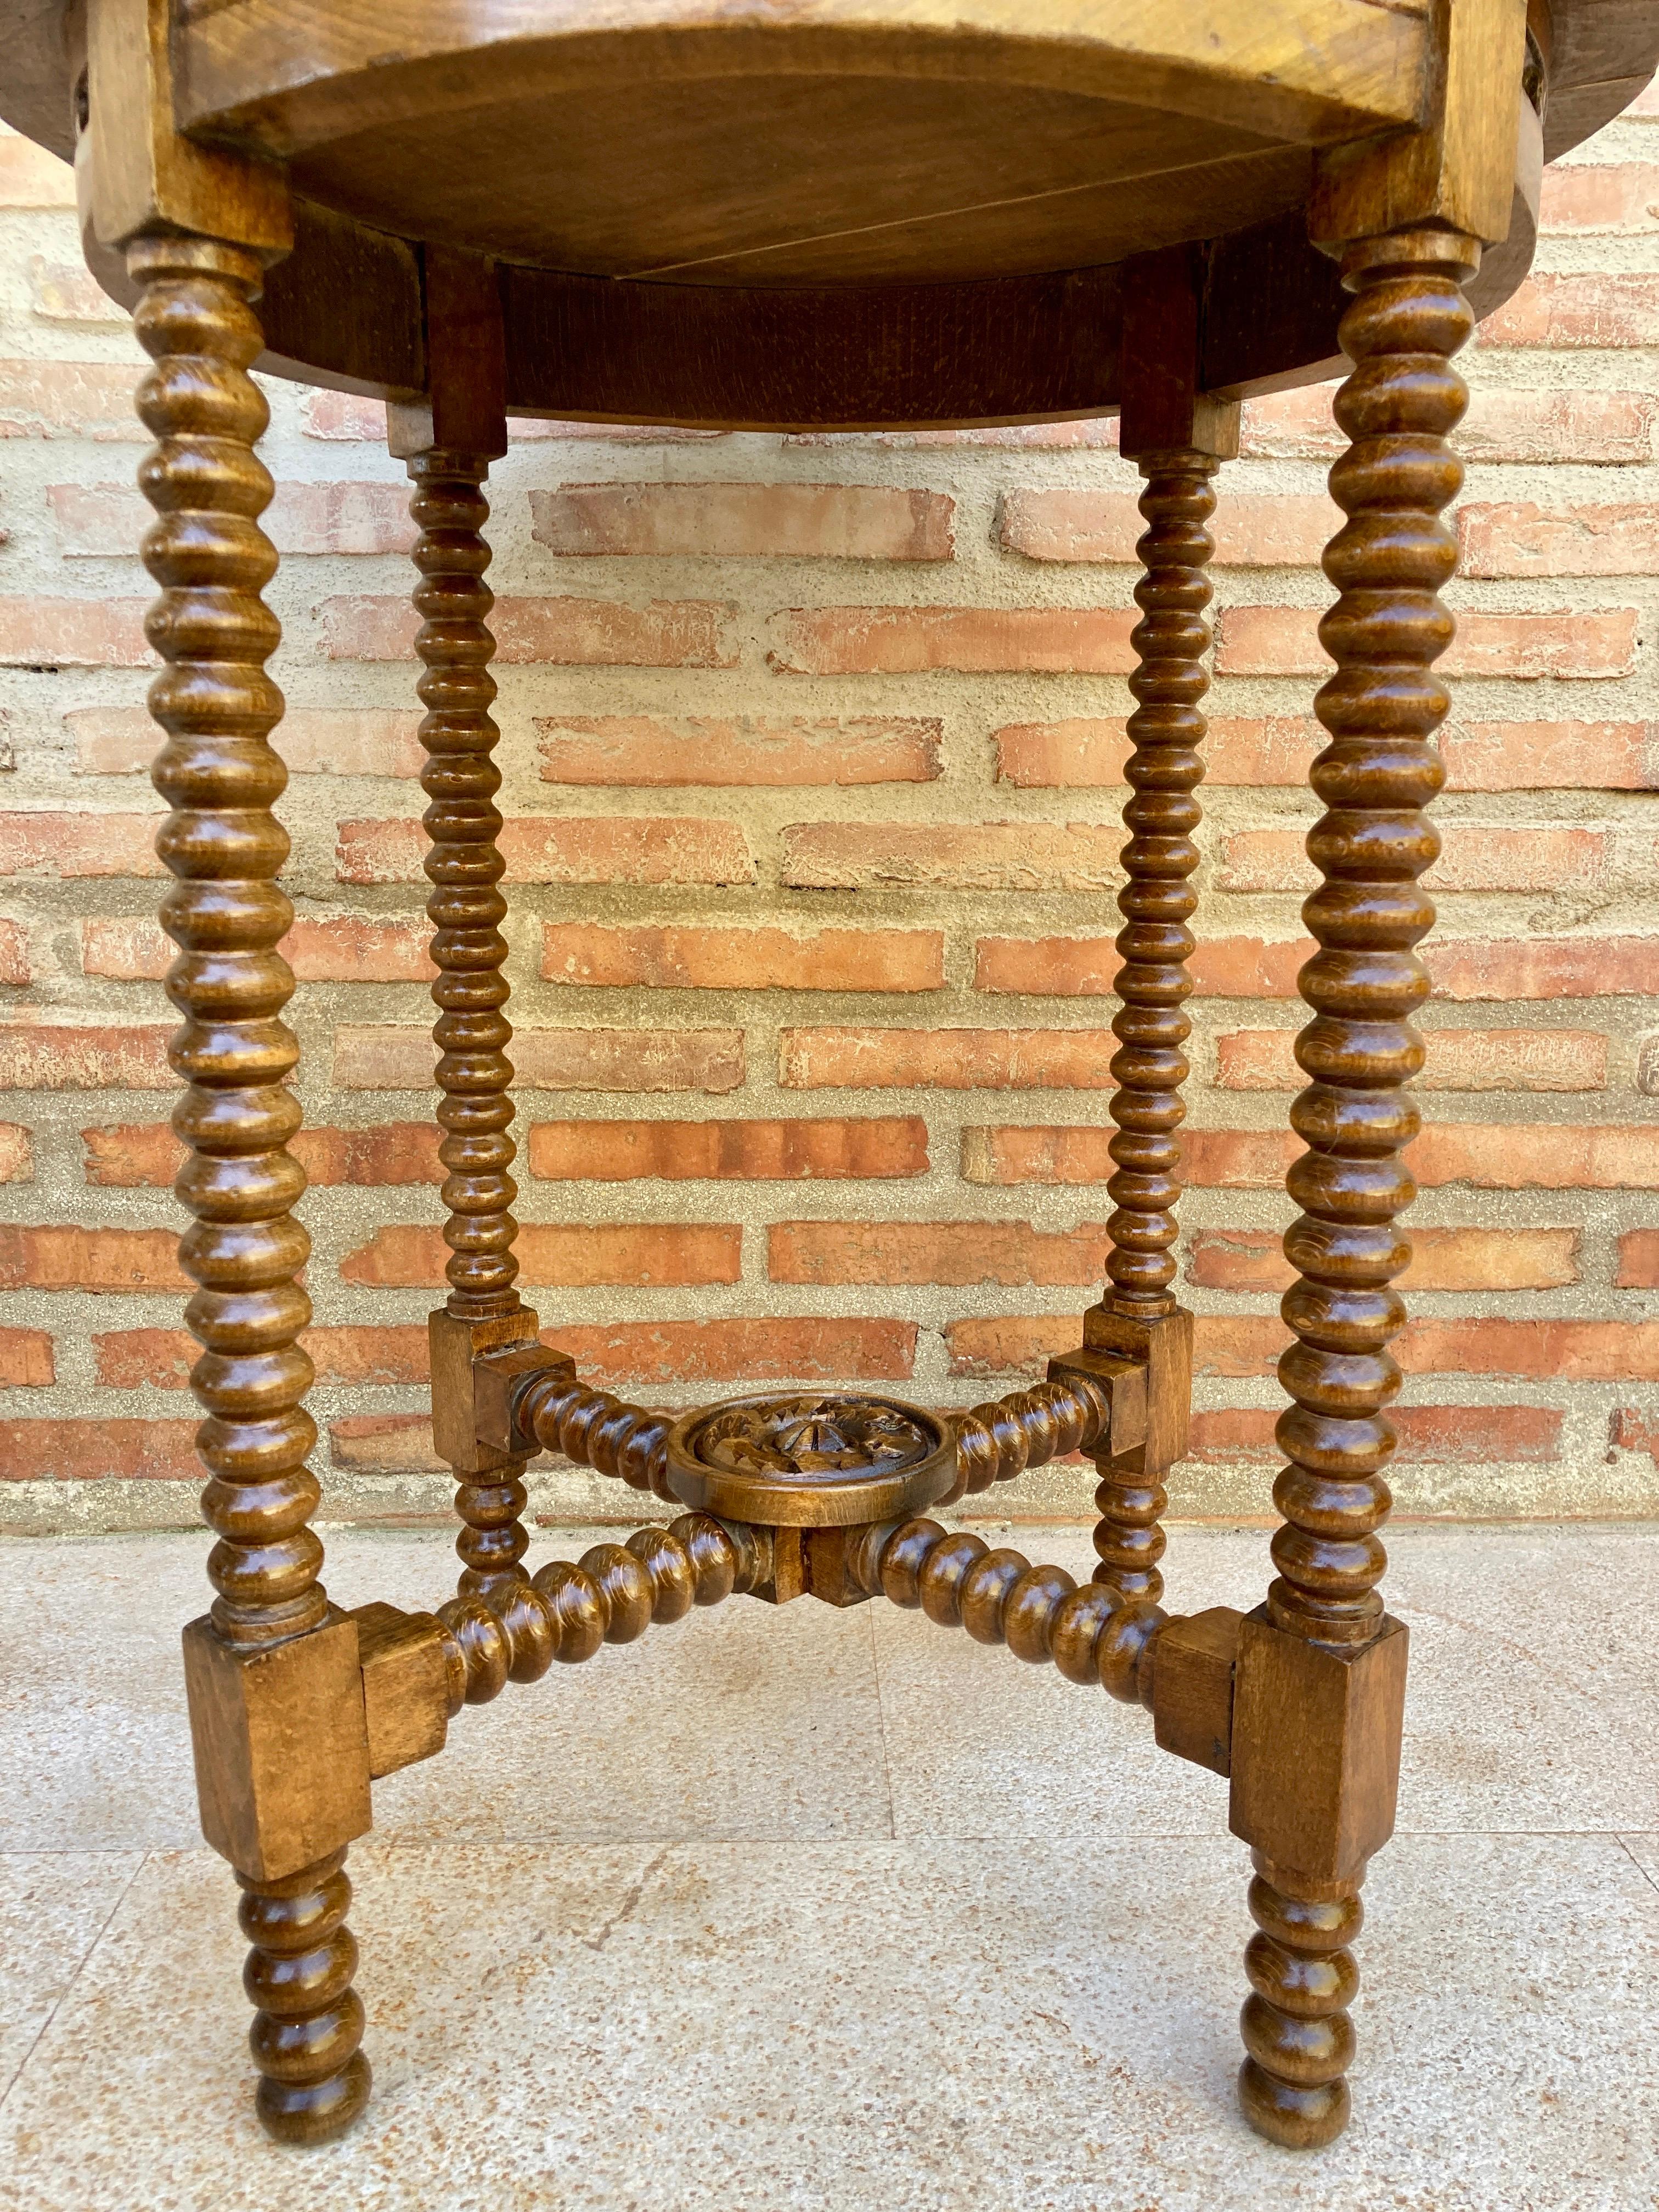 Spanish Round Walnut Side Table With Turned Legs And Beleveled Edges 1900s 4